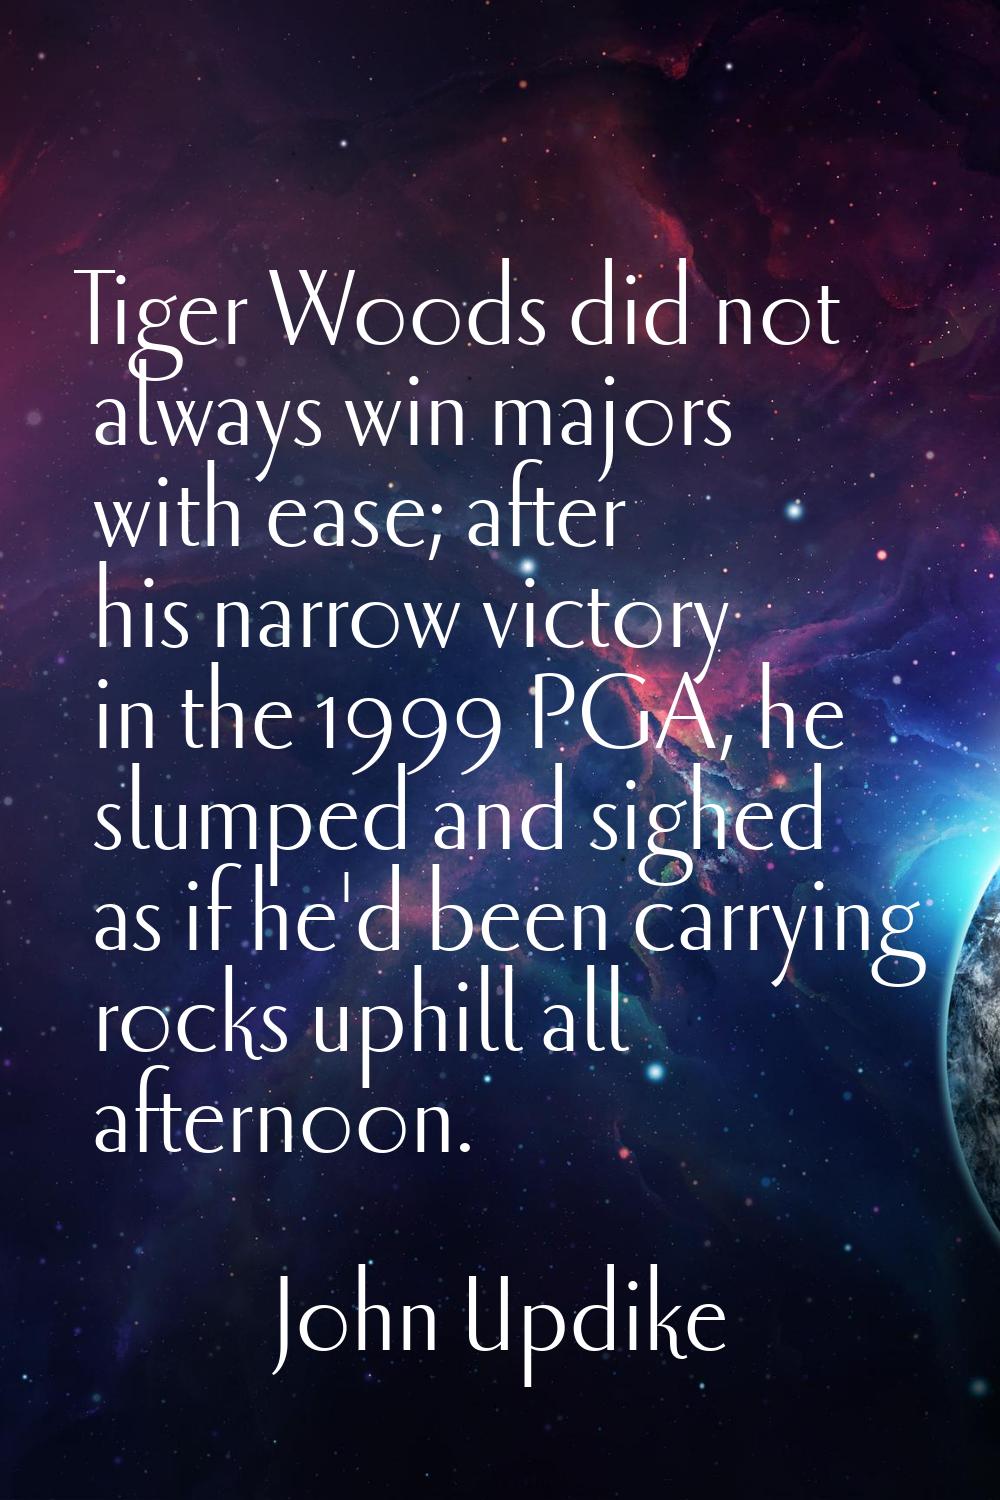 Tiger Woods did not always win majors with ease; after his narrow victory in the 1999 PGA, he slump